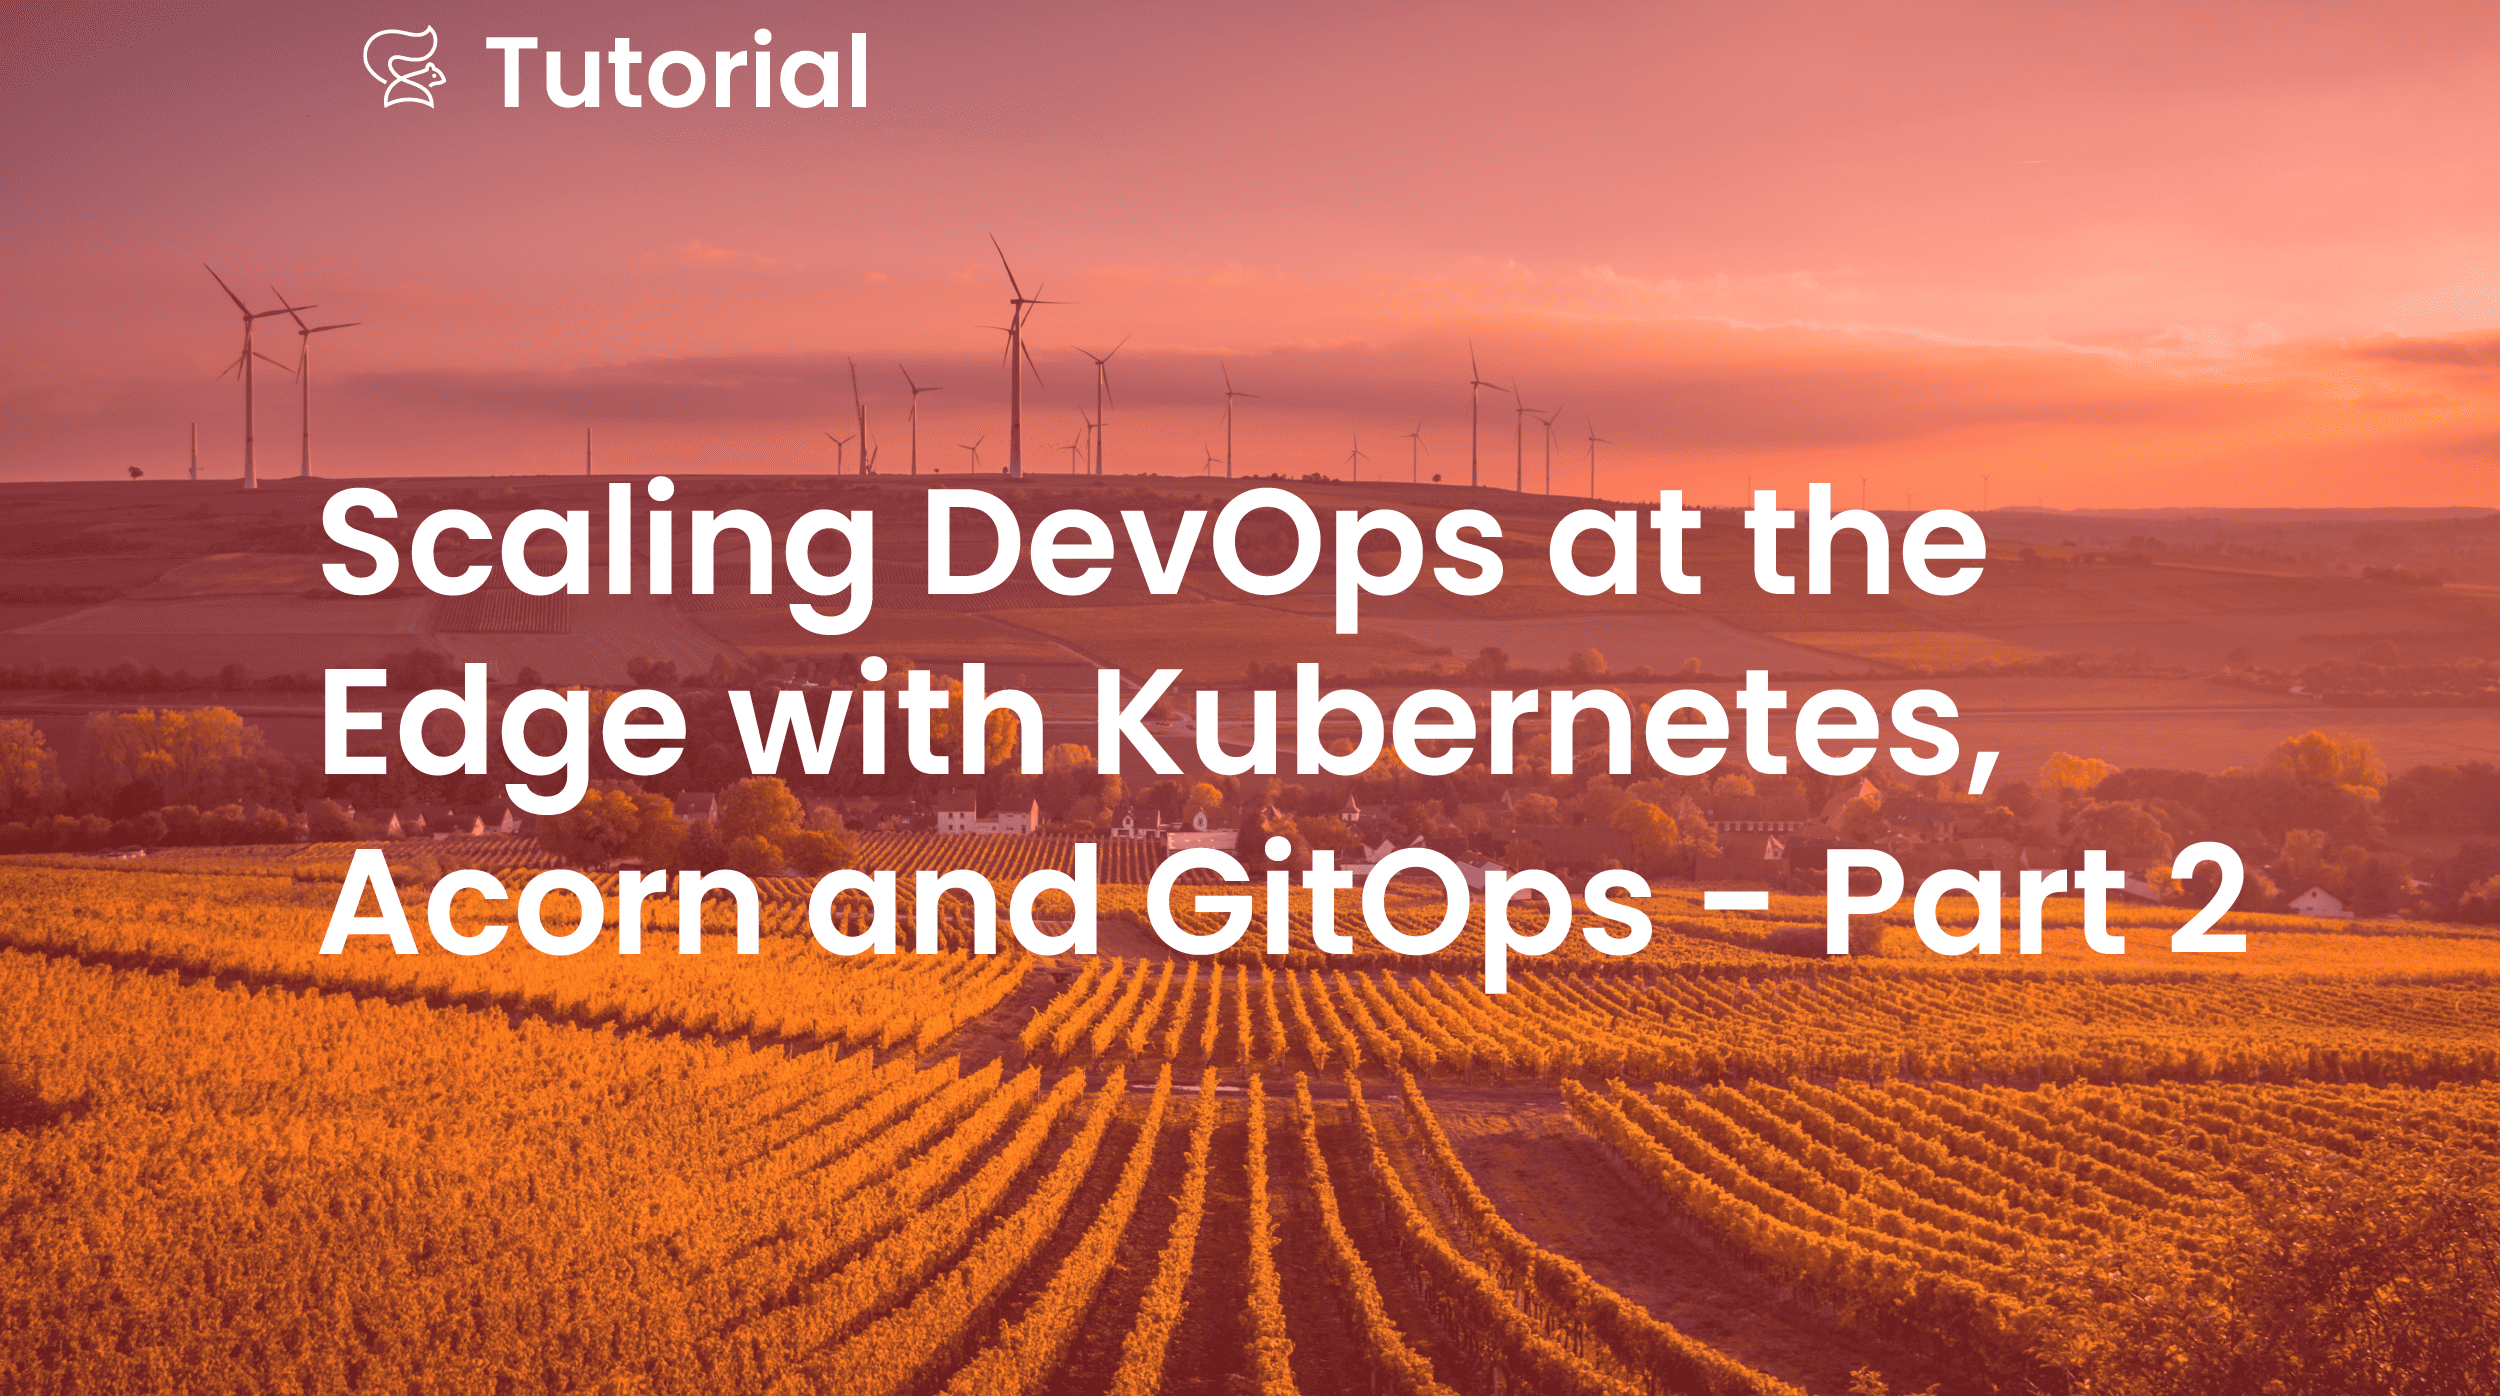 Scaling DevOps at the Edge with Kubernetes, Acorn and GitOps – Part 2